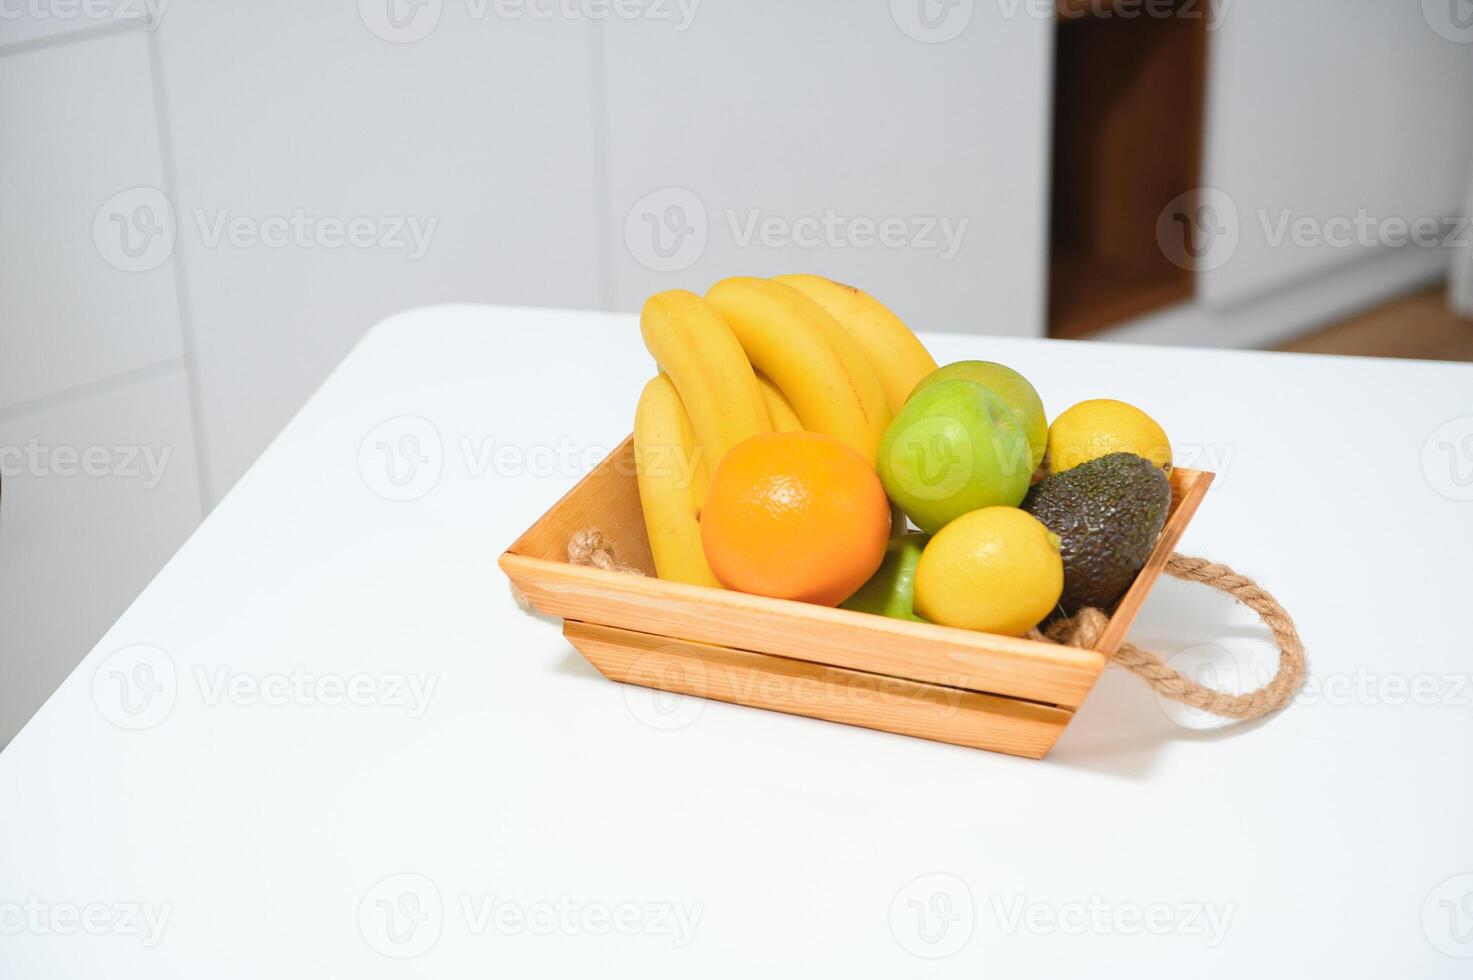 handmade kraft box with fruits and vegetables on kitchen background. photo